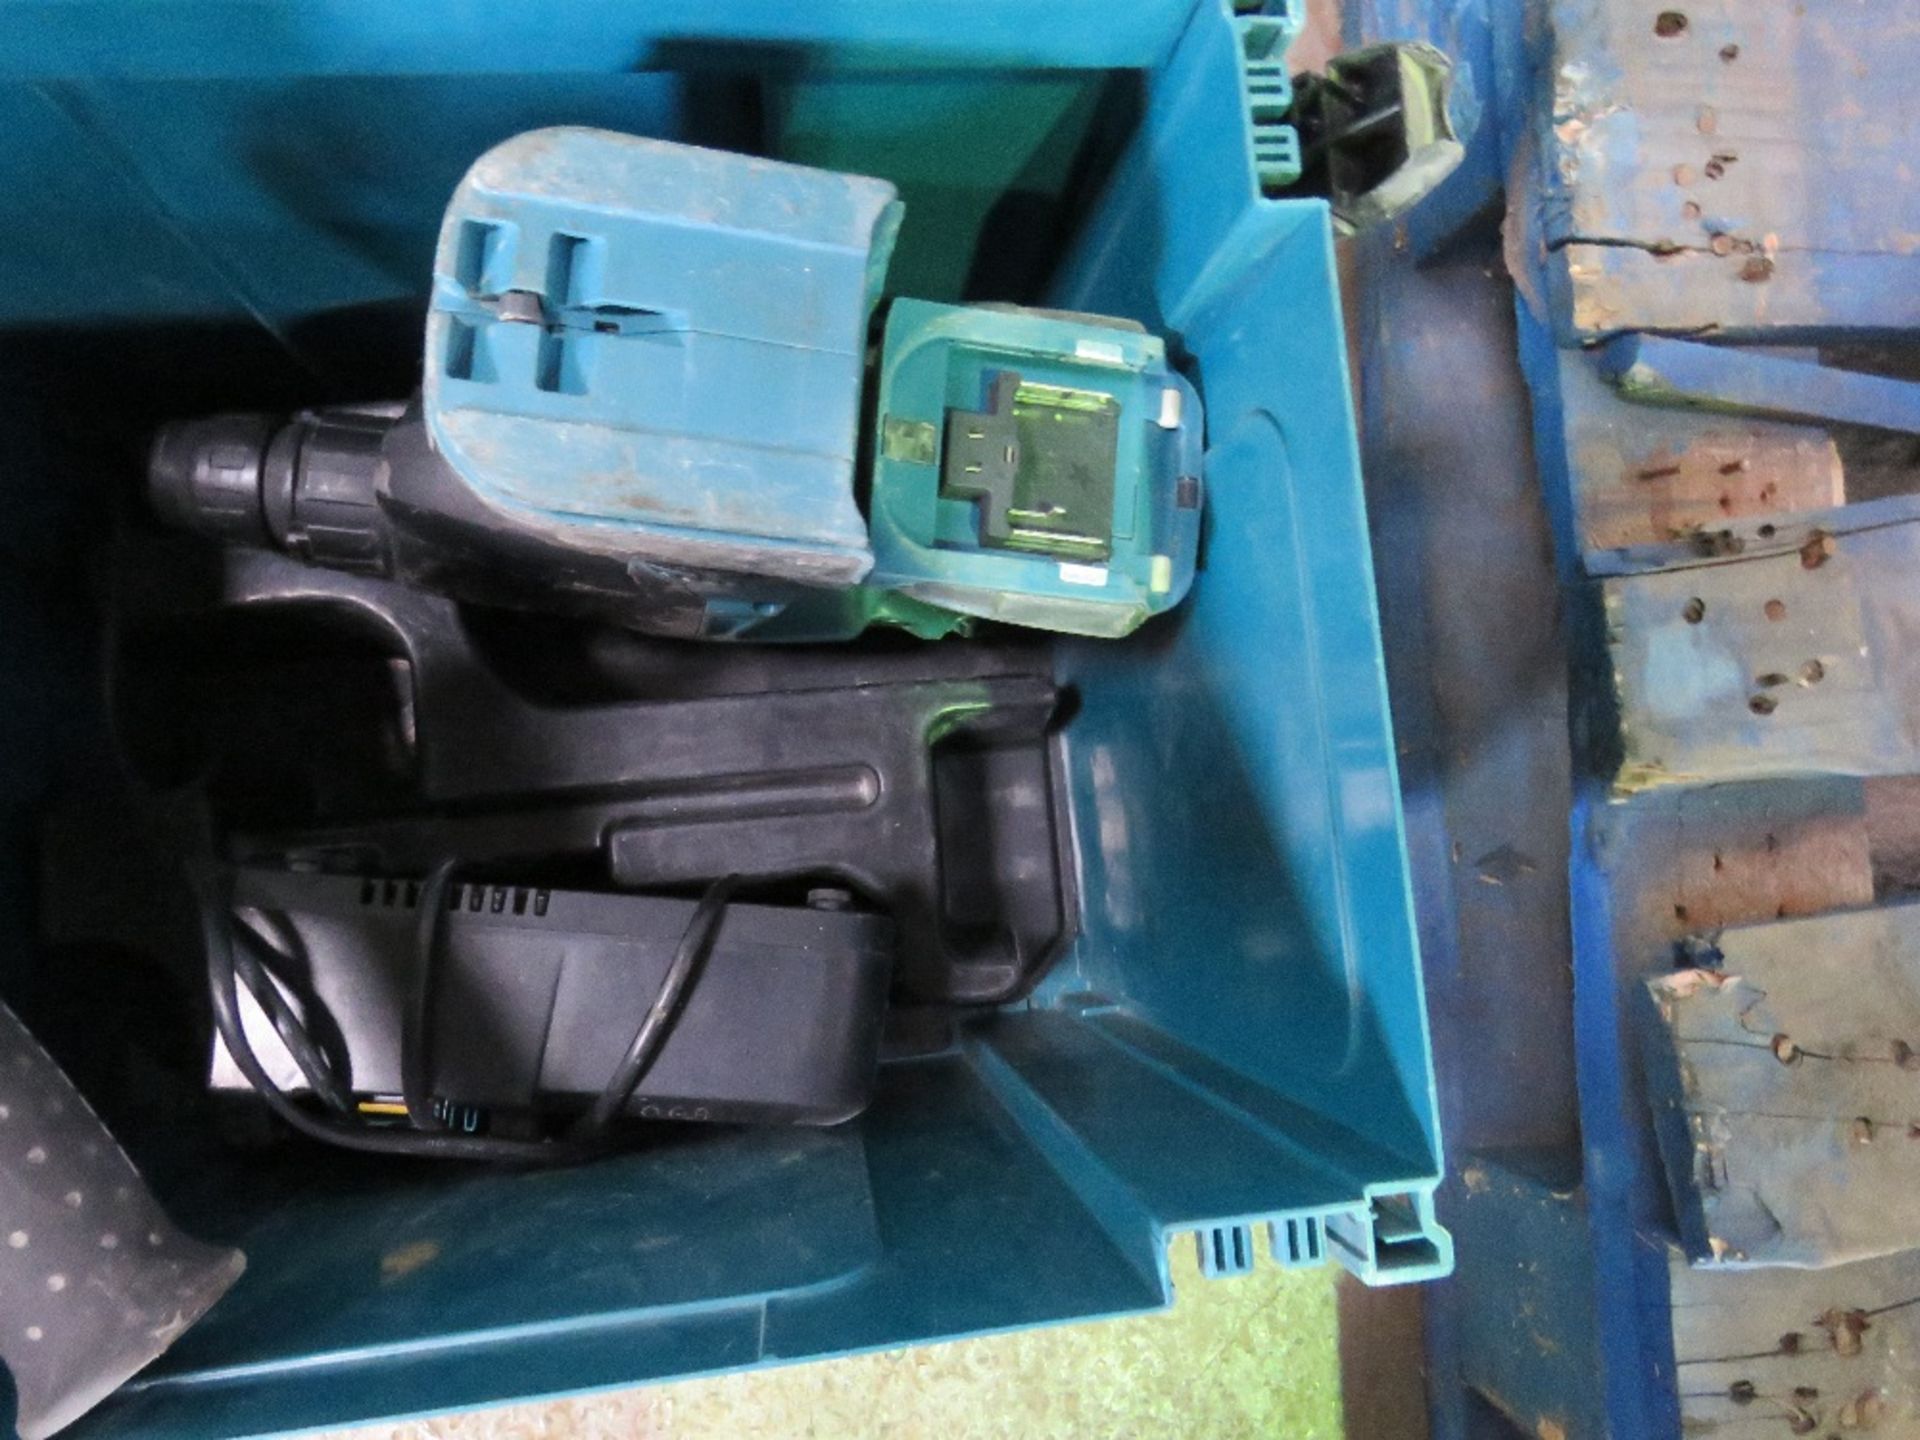 2 X MAKITA DHR242 DRILLS WITH A CHARGER BUT NO BATTERIES. UNTESTED, CONDITION UNKNOWN. - Image 3 of 3